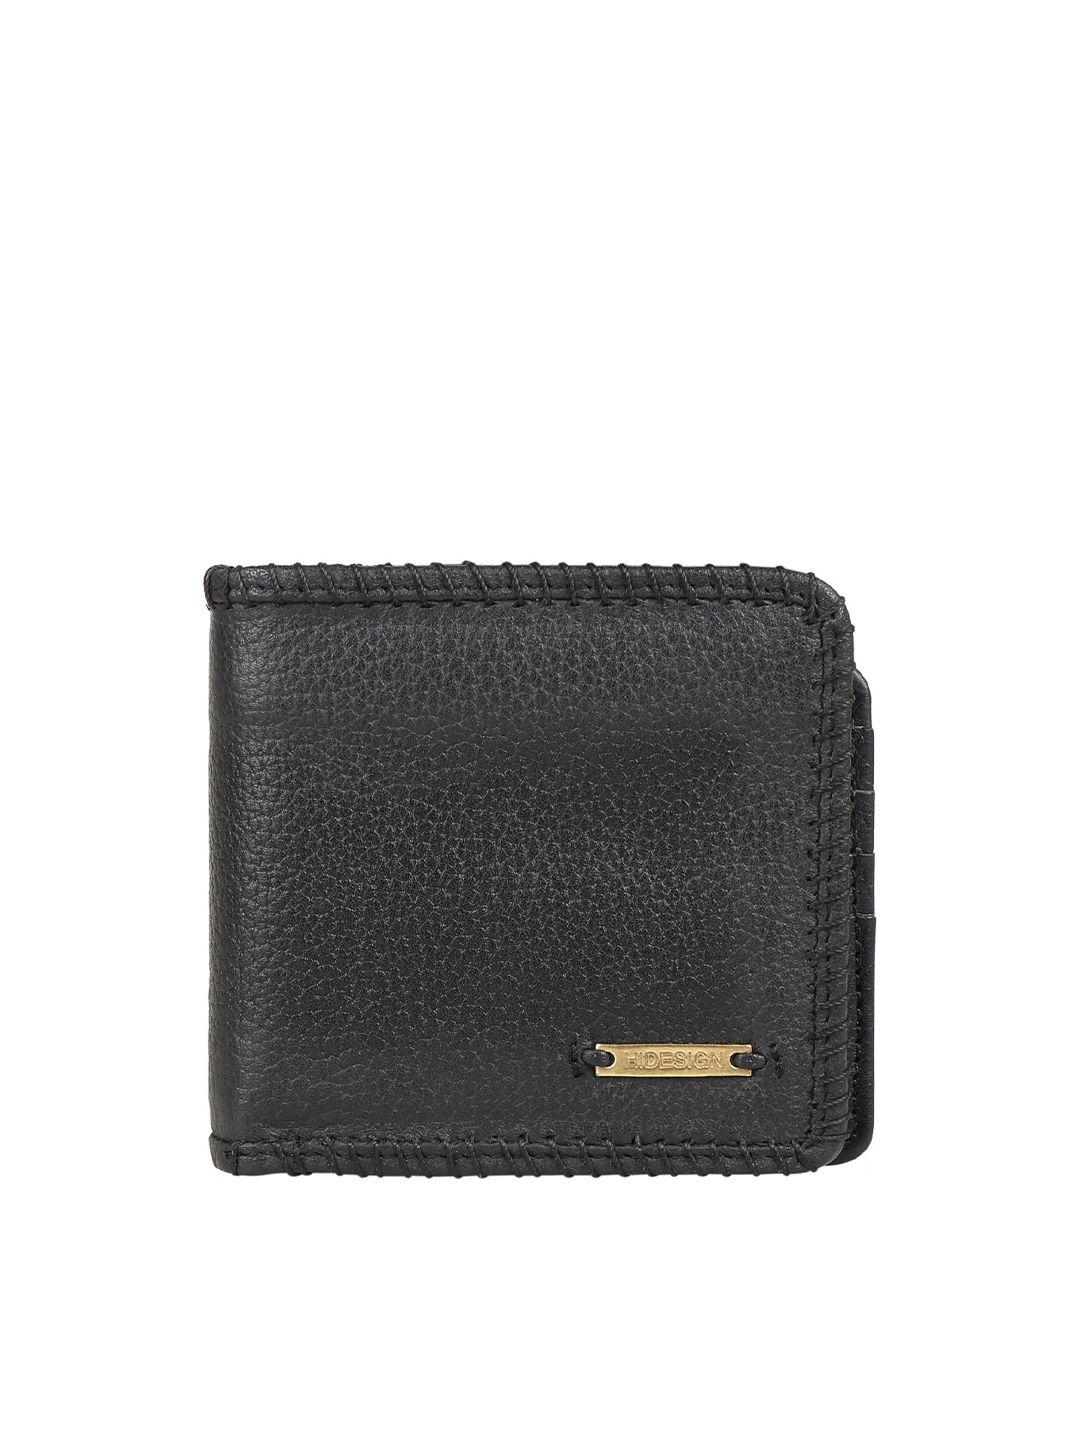 hidesign men black textured leather two fold wallet